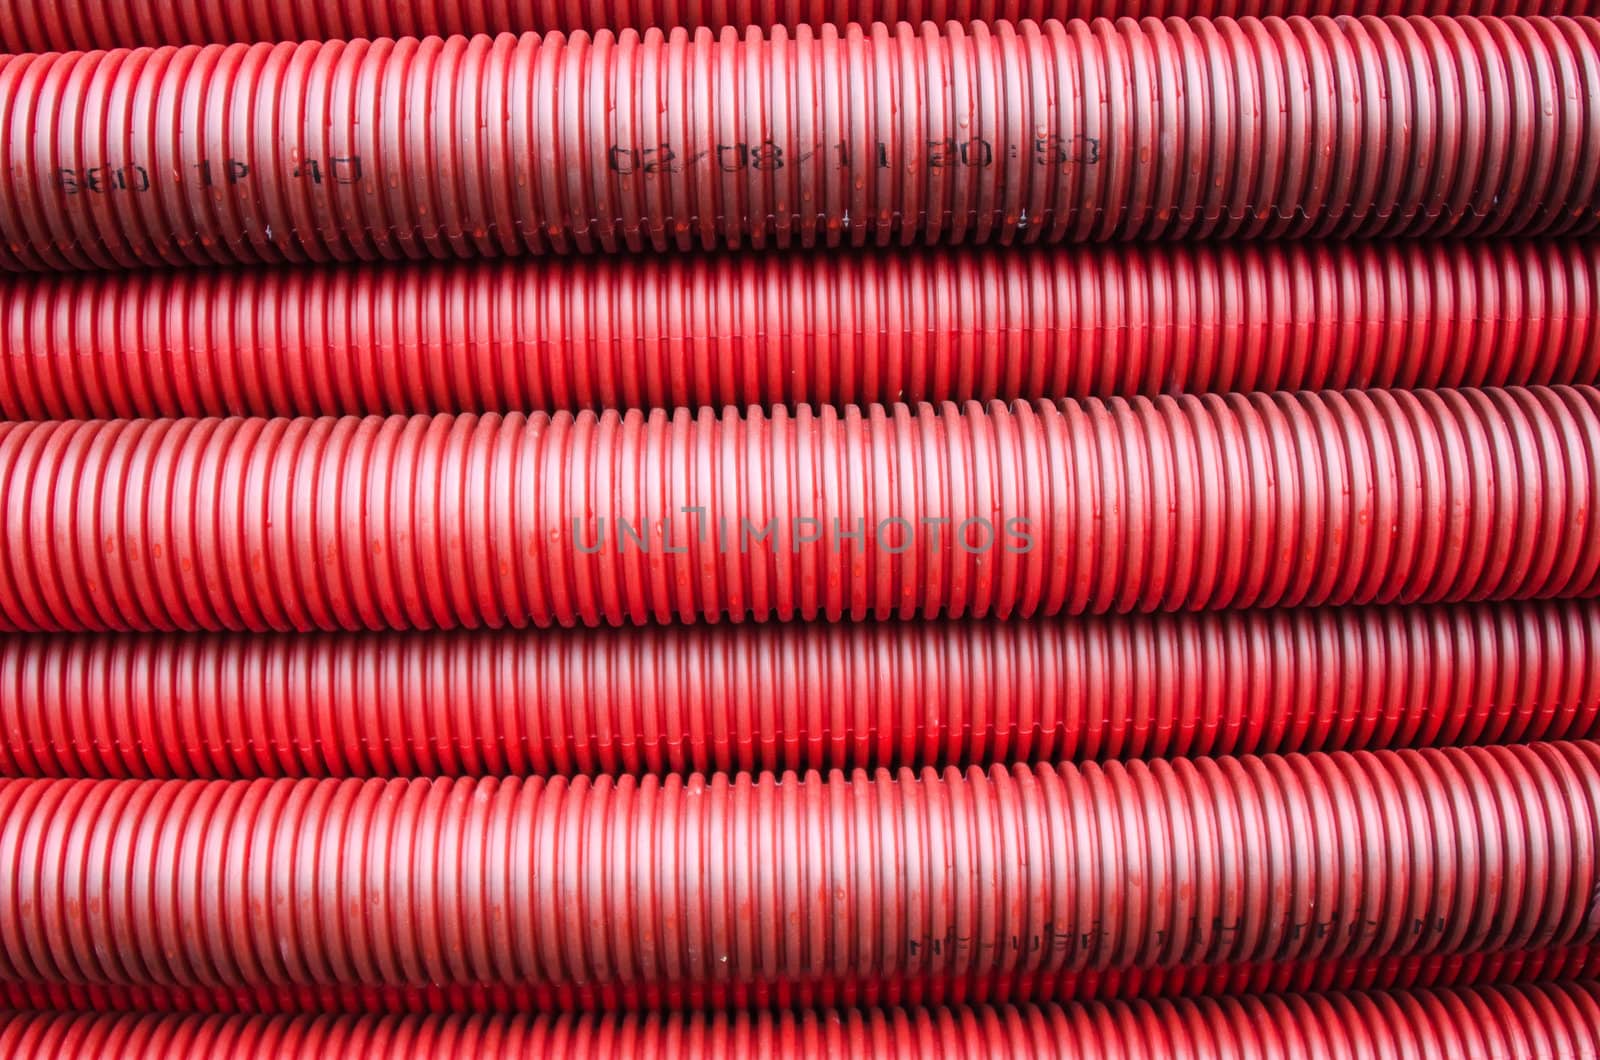 the  red tubing by njaj